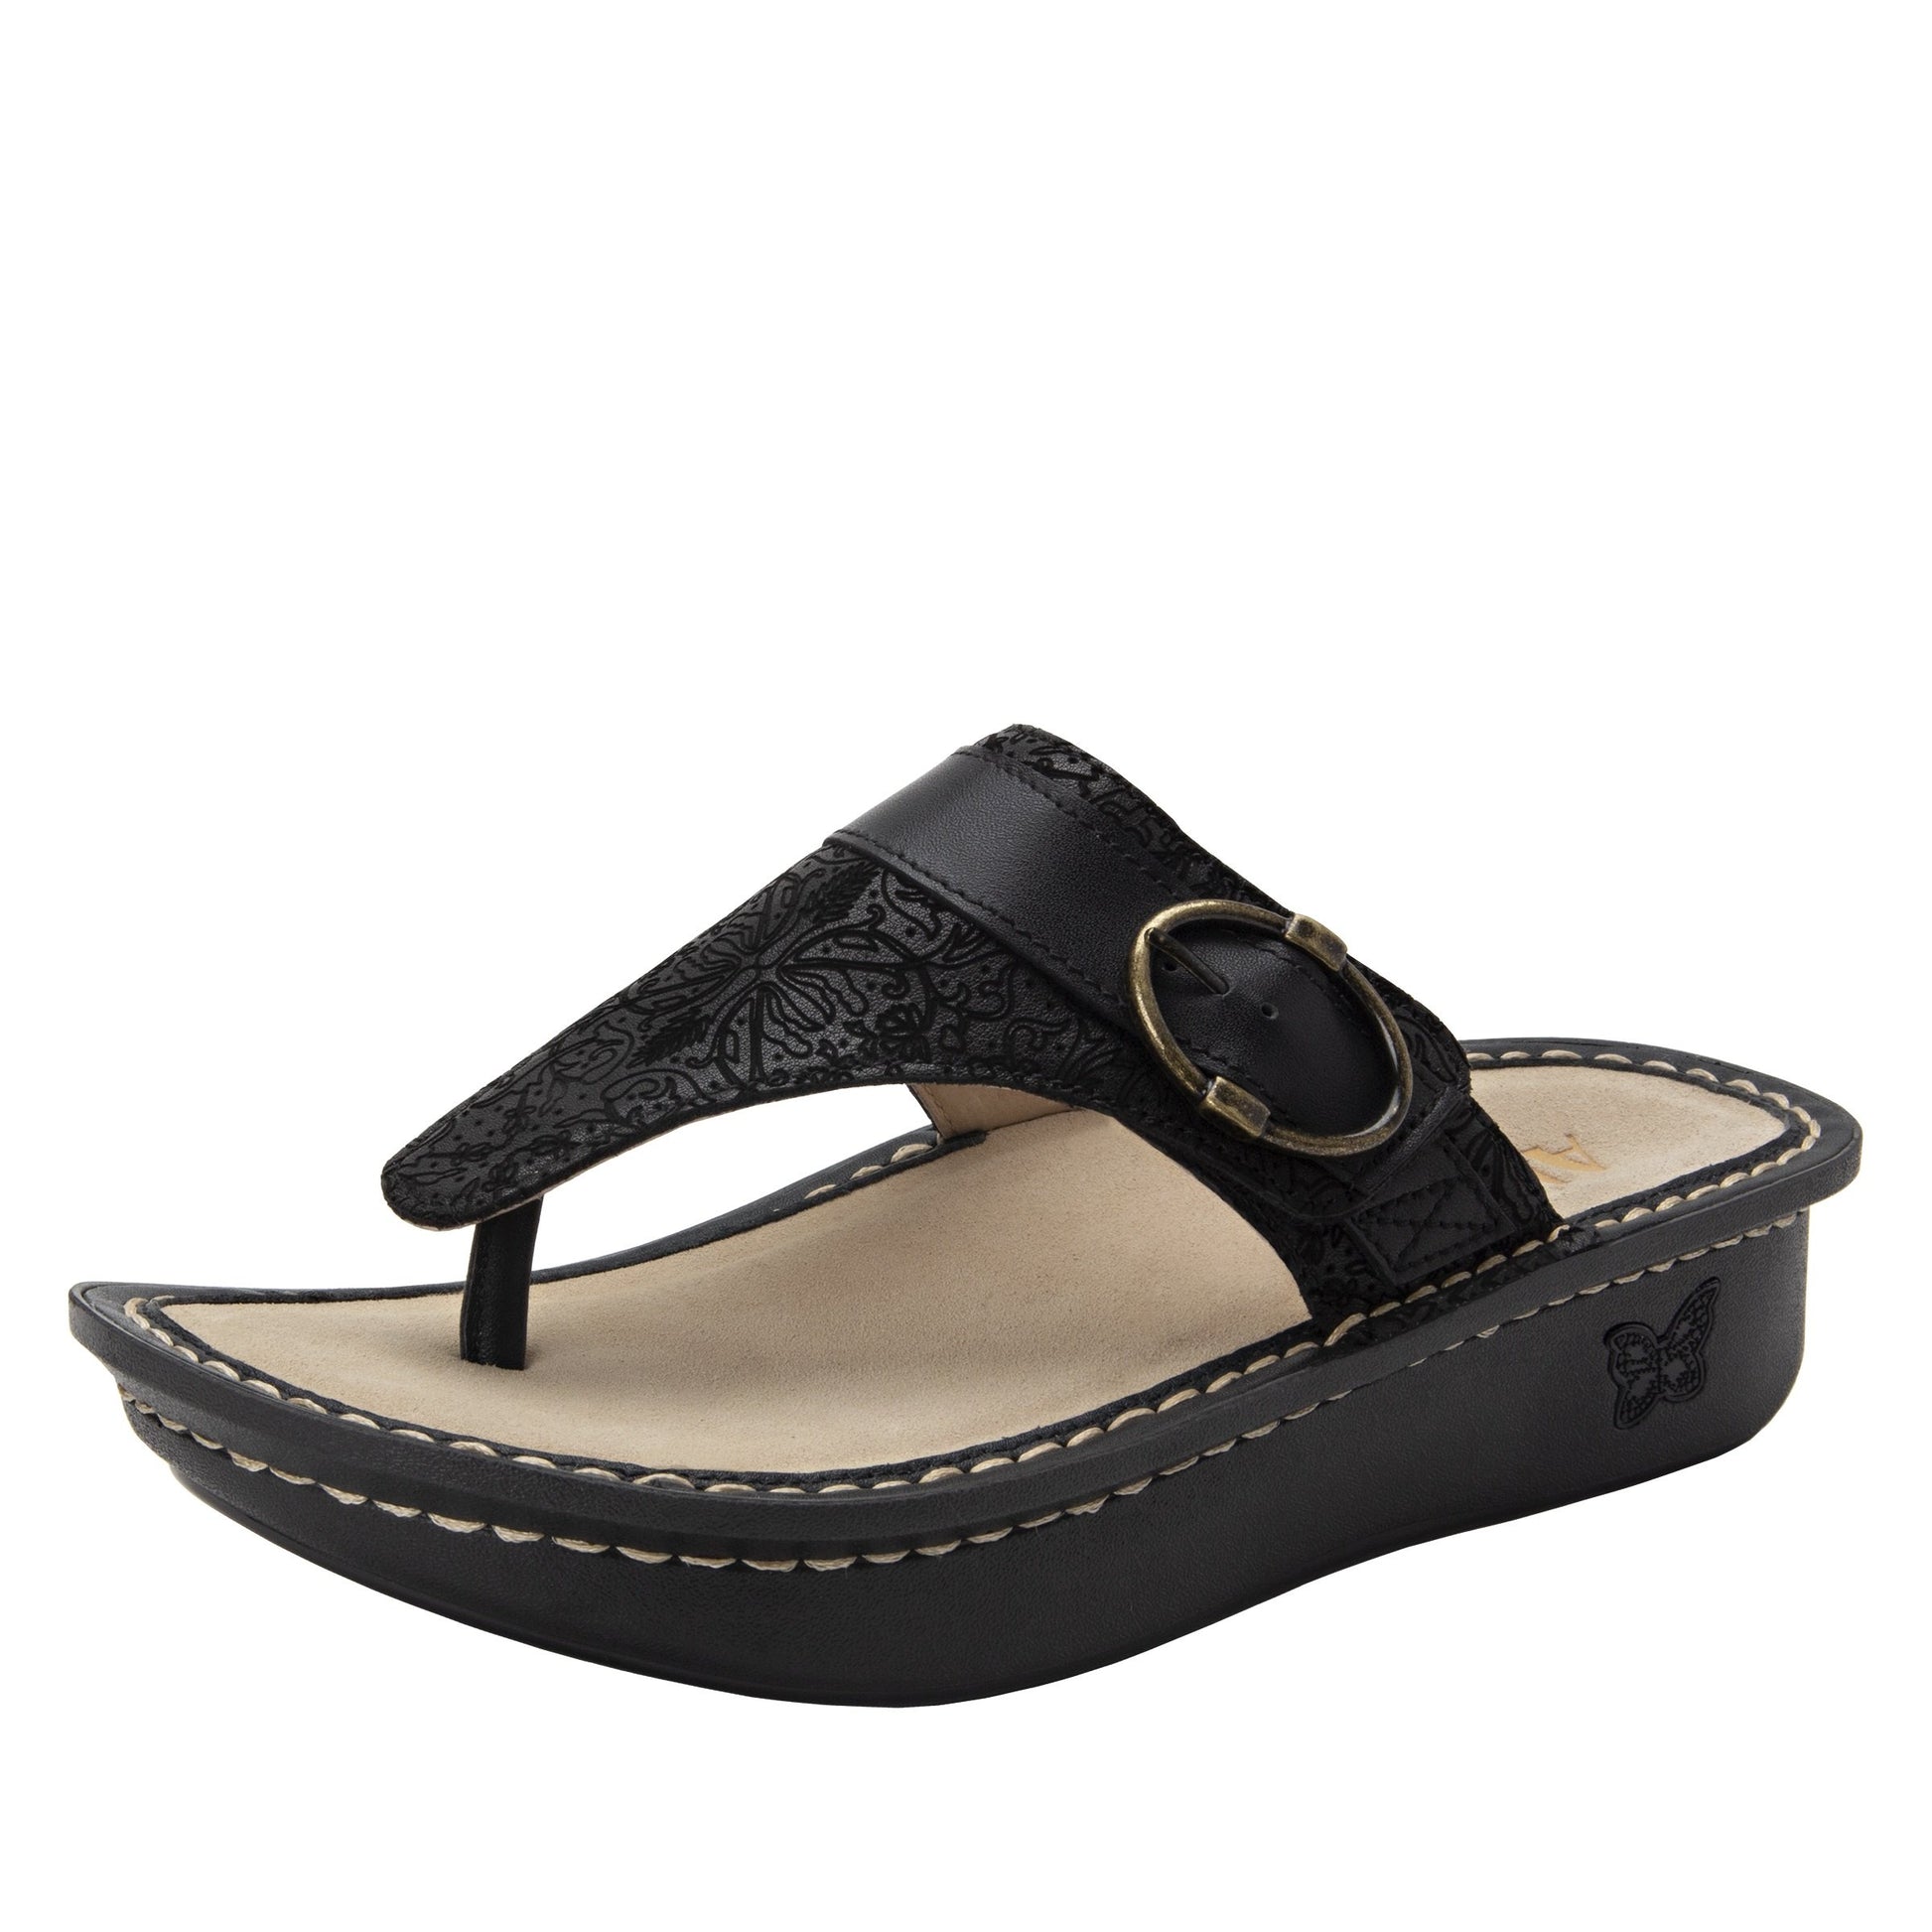 Alegria Sale Shoe Size 38 Cody Thong Sandal in Trellis at Parker's Clothing and Shoes.